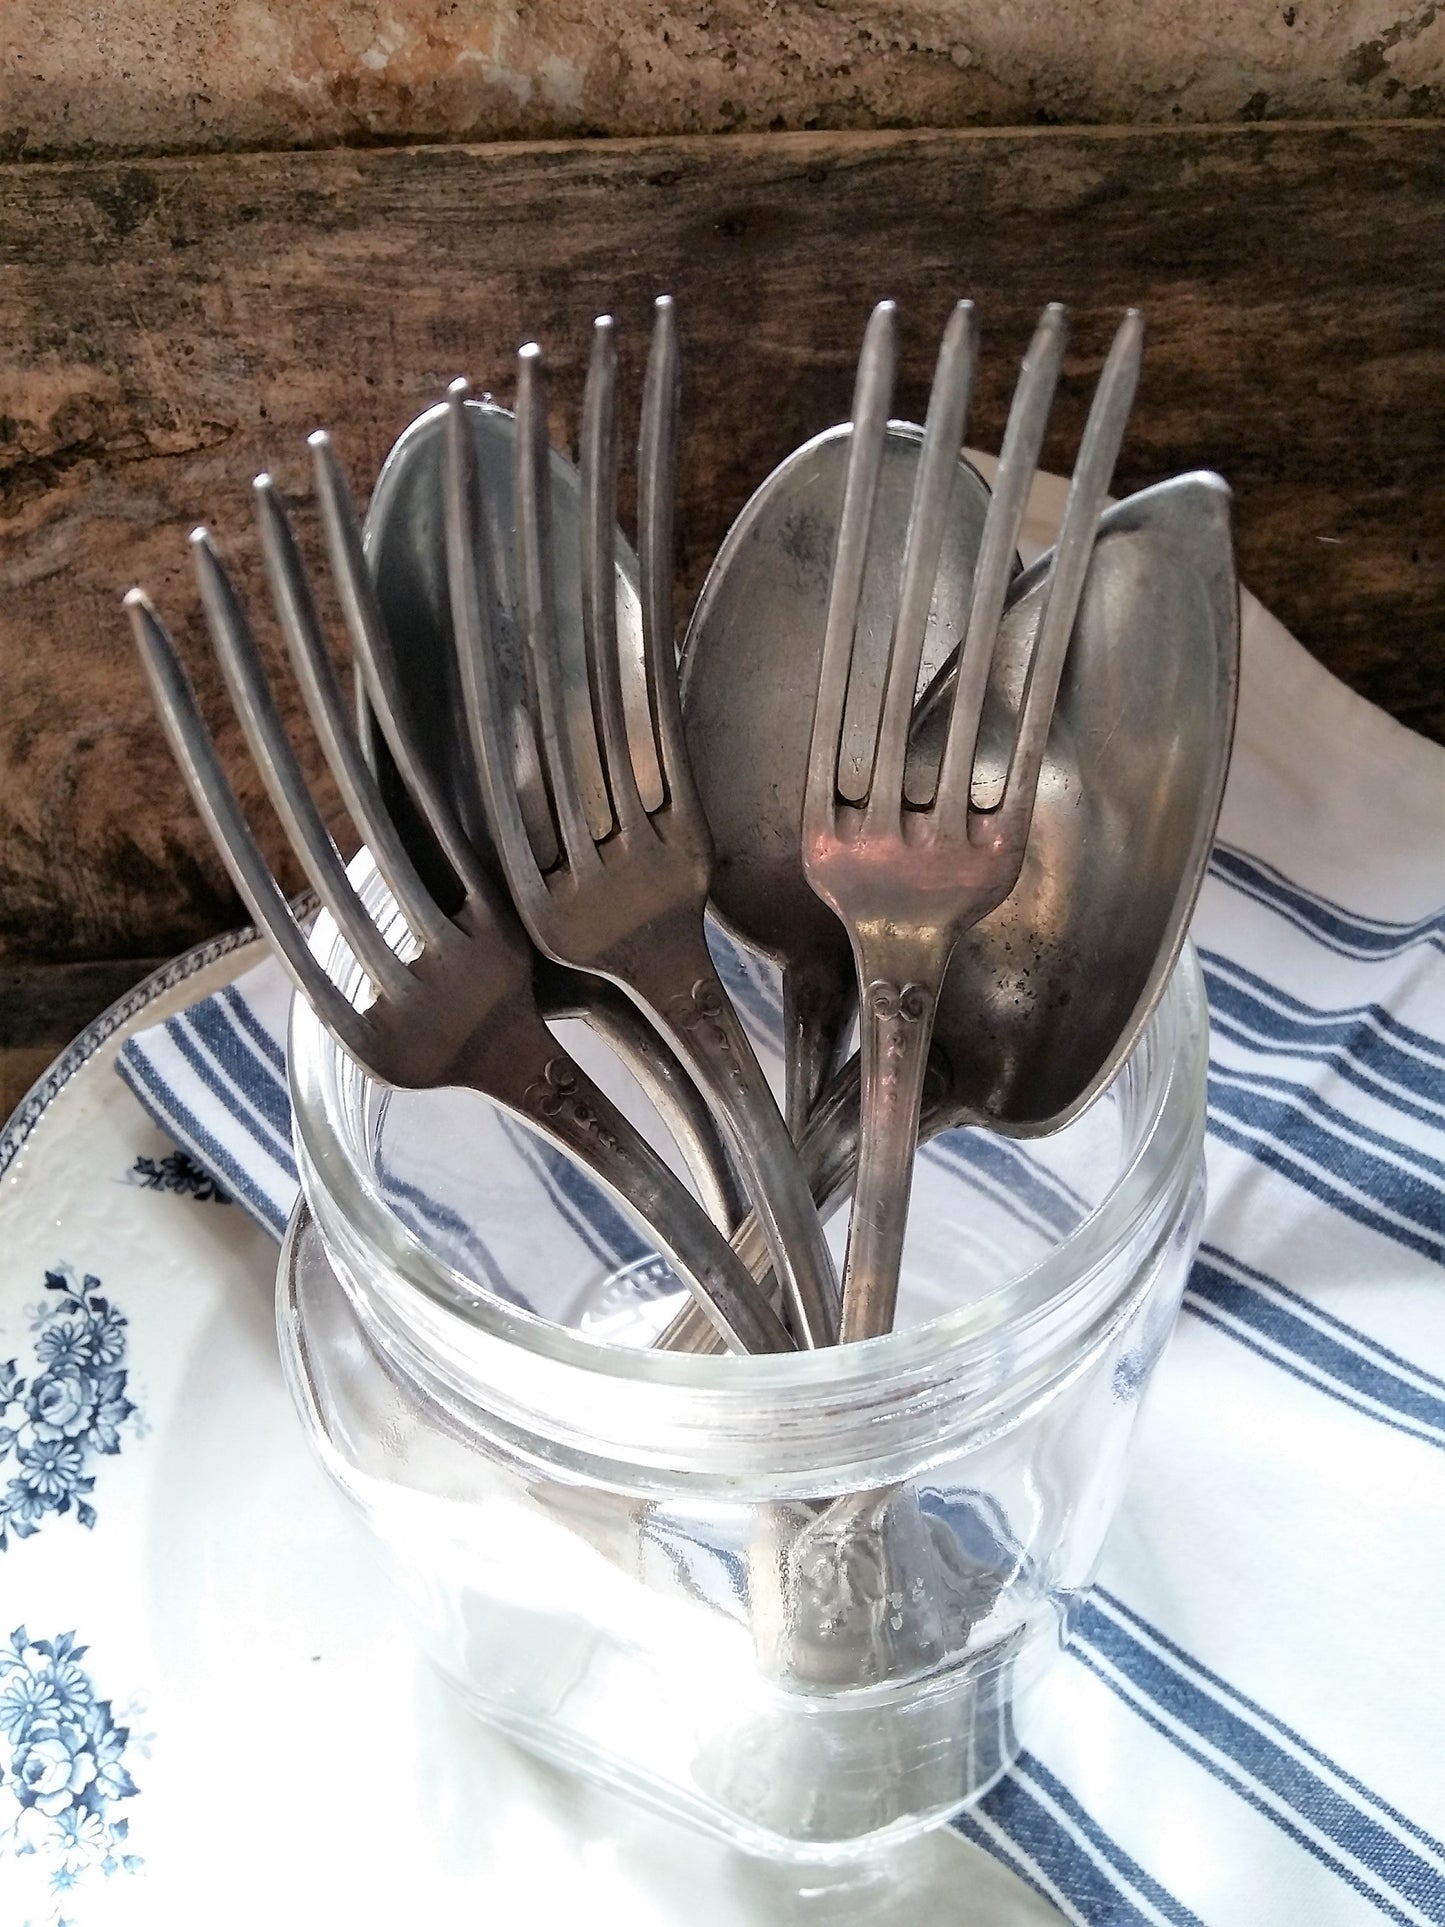 6 Antique Forks & Spoons. Ornate Metal Forks and Dessert Spoons. from Tiggy & Pip - €56.00! Shop now at Tiggy and Pip